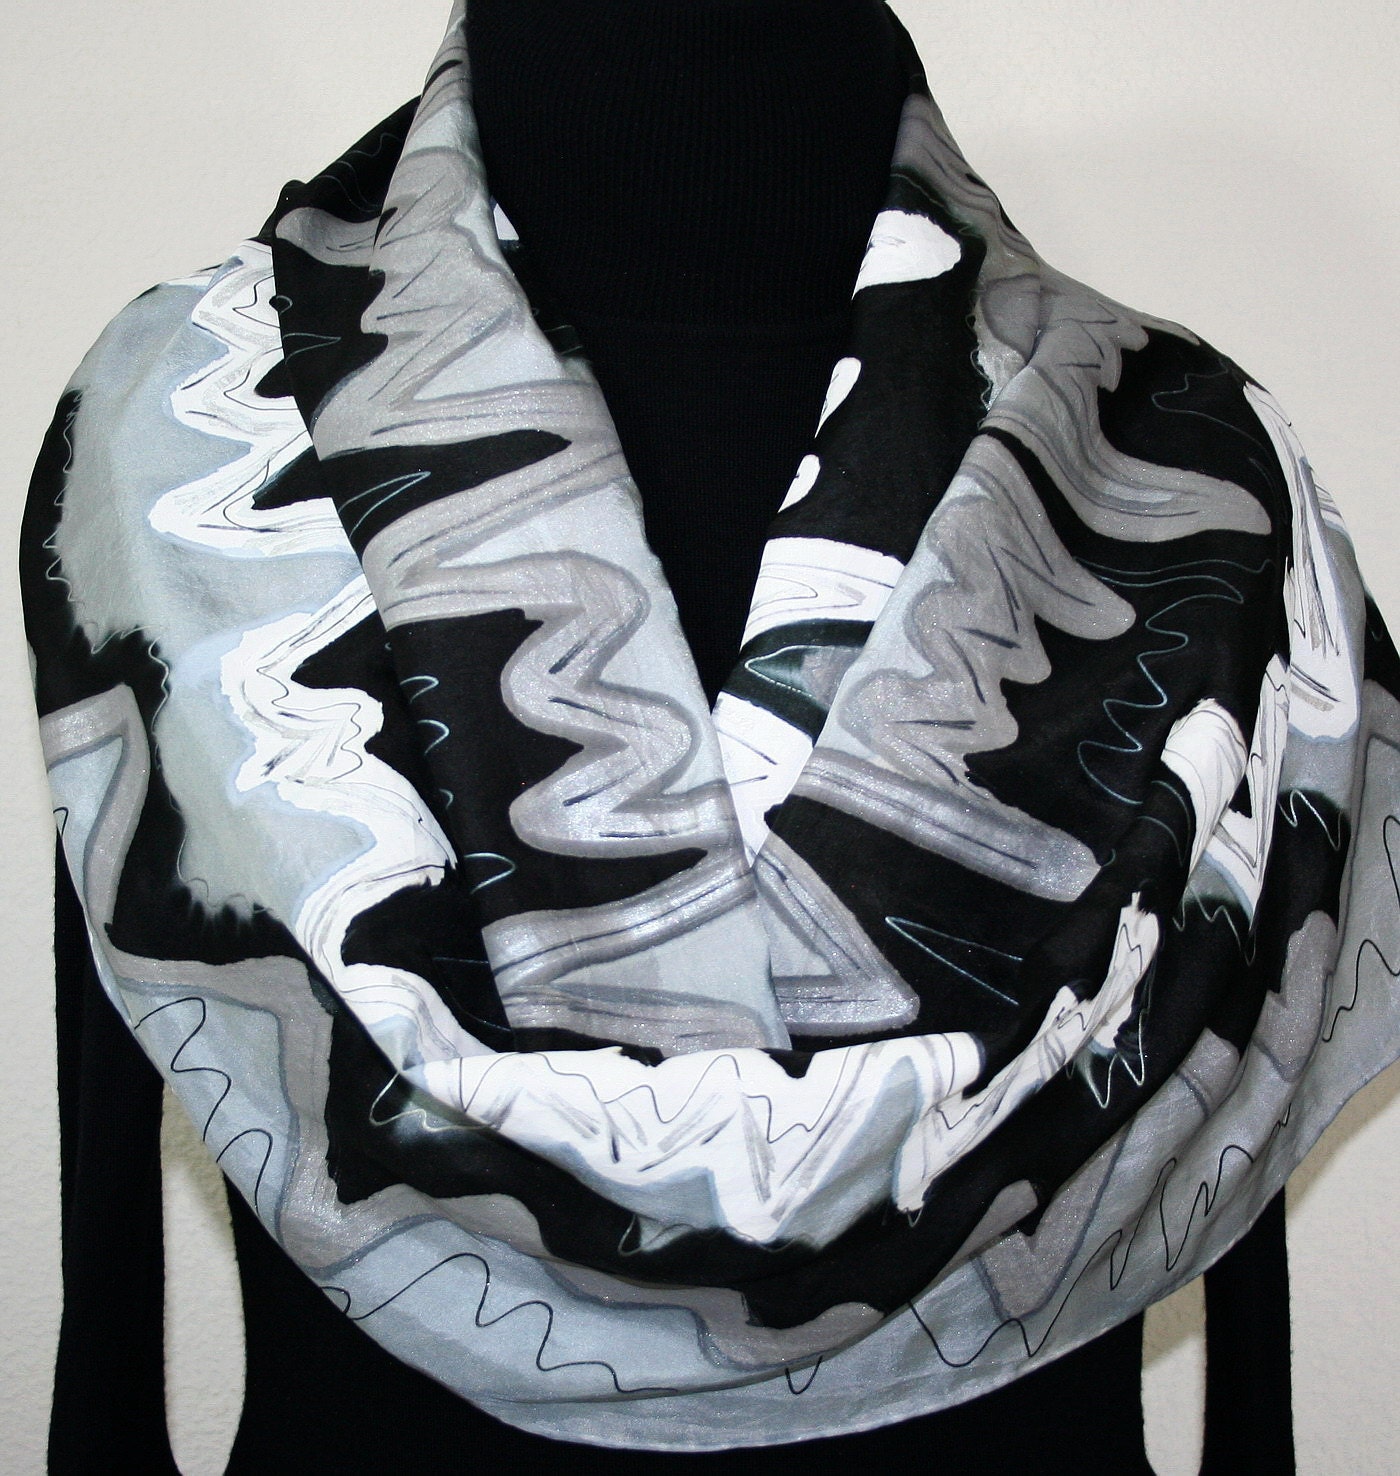 Hand Painted Silk Scarf City Rhythm. Silk Scarf in Black, White and Silver Gray. Size 14x70. Made in Colorado. 100% silk. Made to order. - SilkScarvesColorado